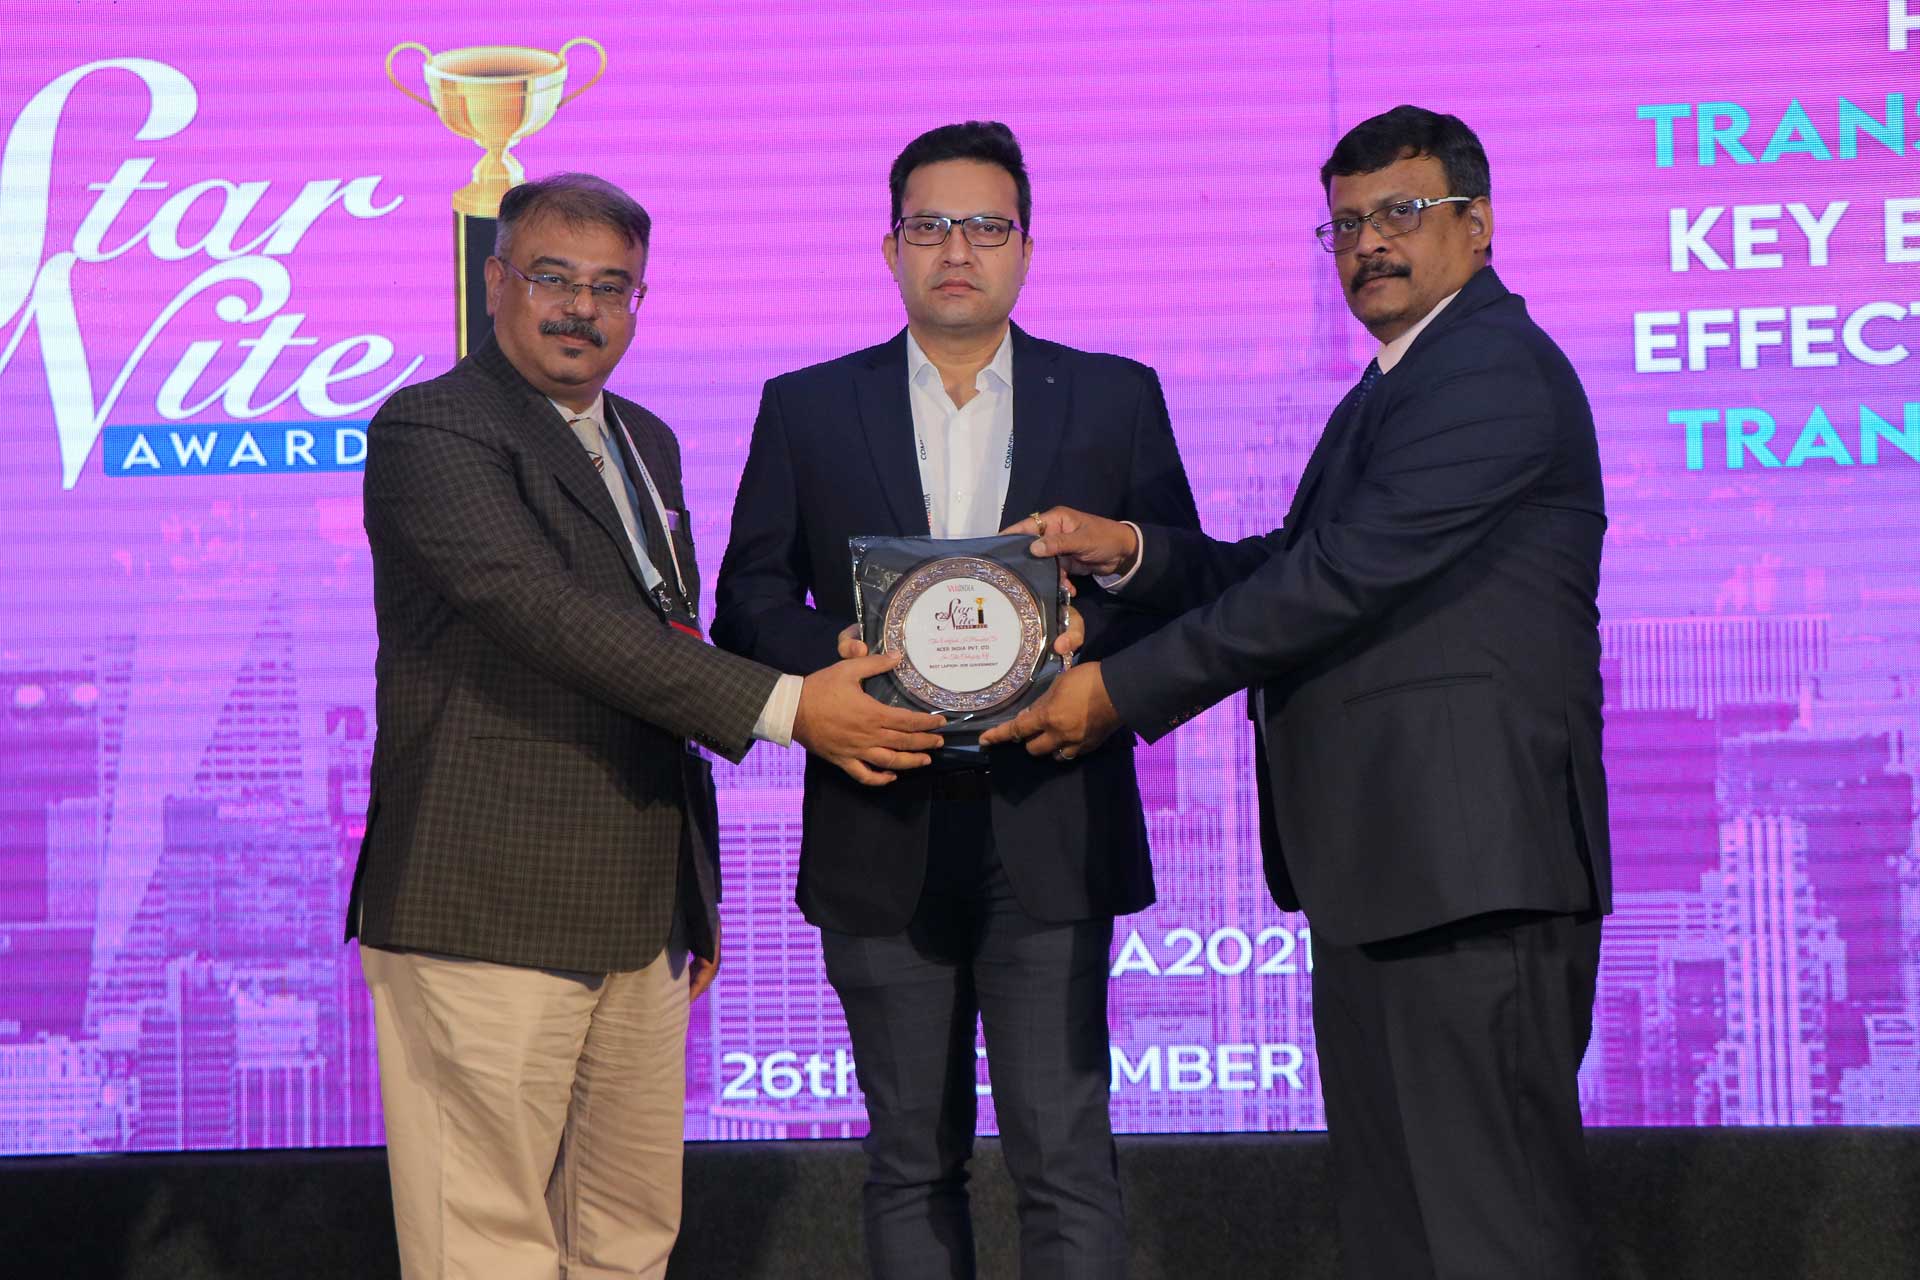 Best LAPTOP for Government Award goes to Acer India Pvt. Ltd. at 20th Star Nite Awards 2021